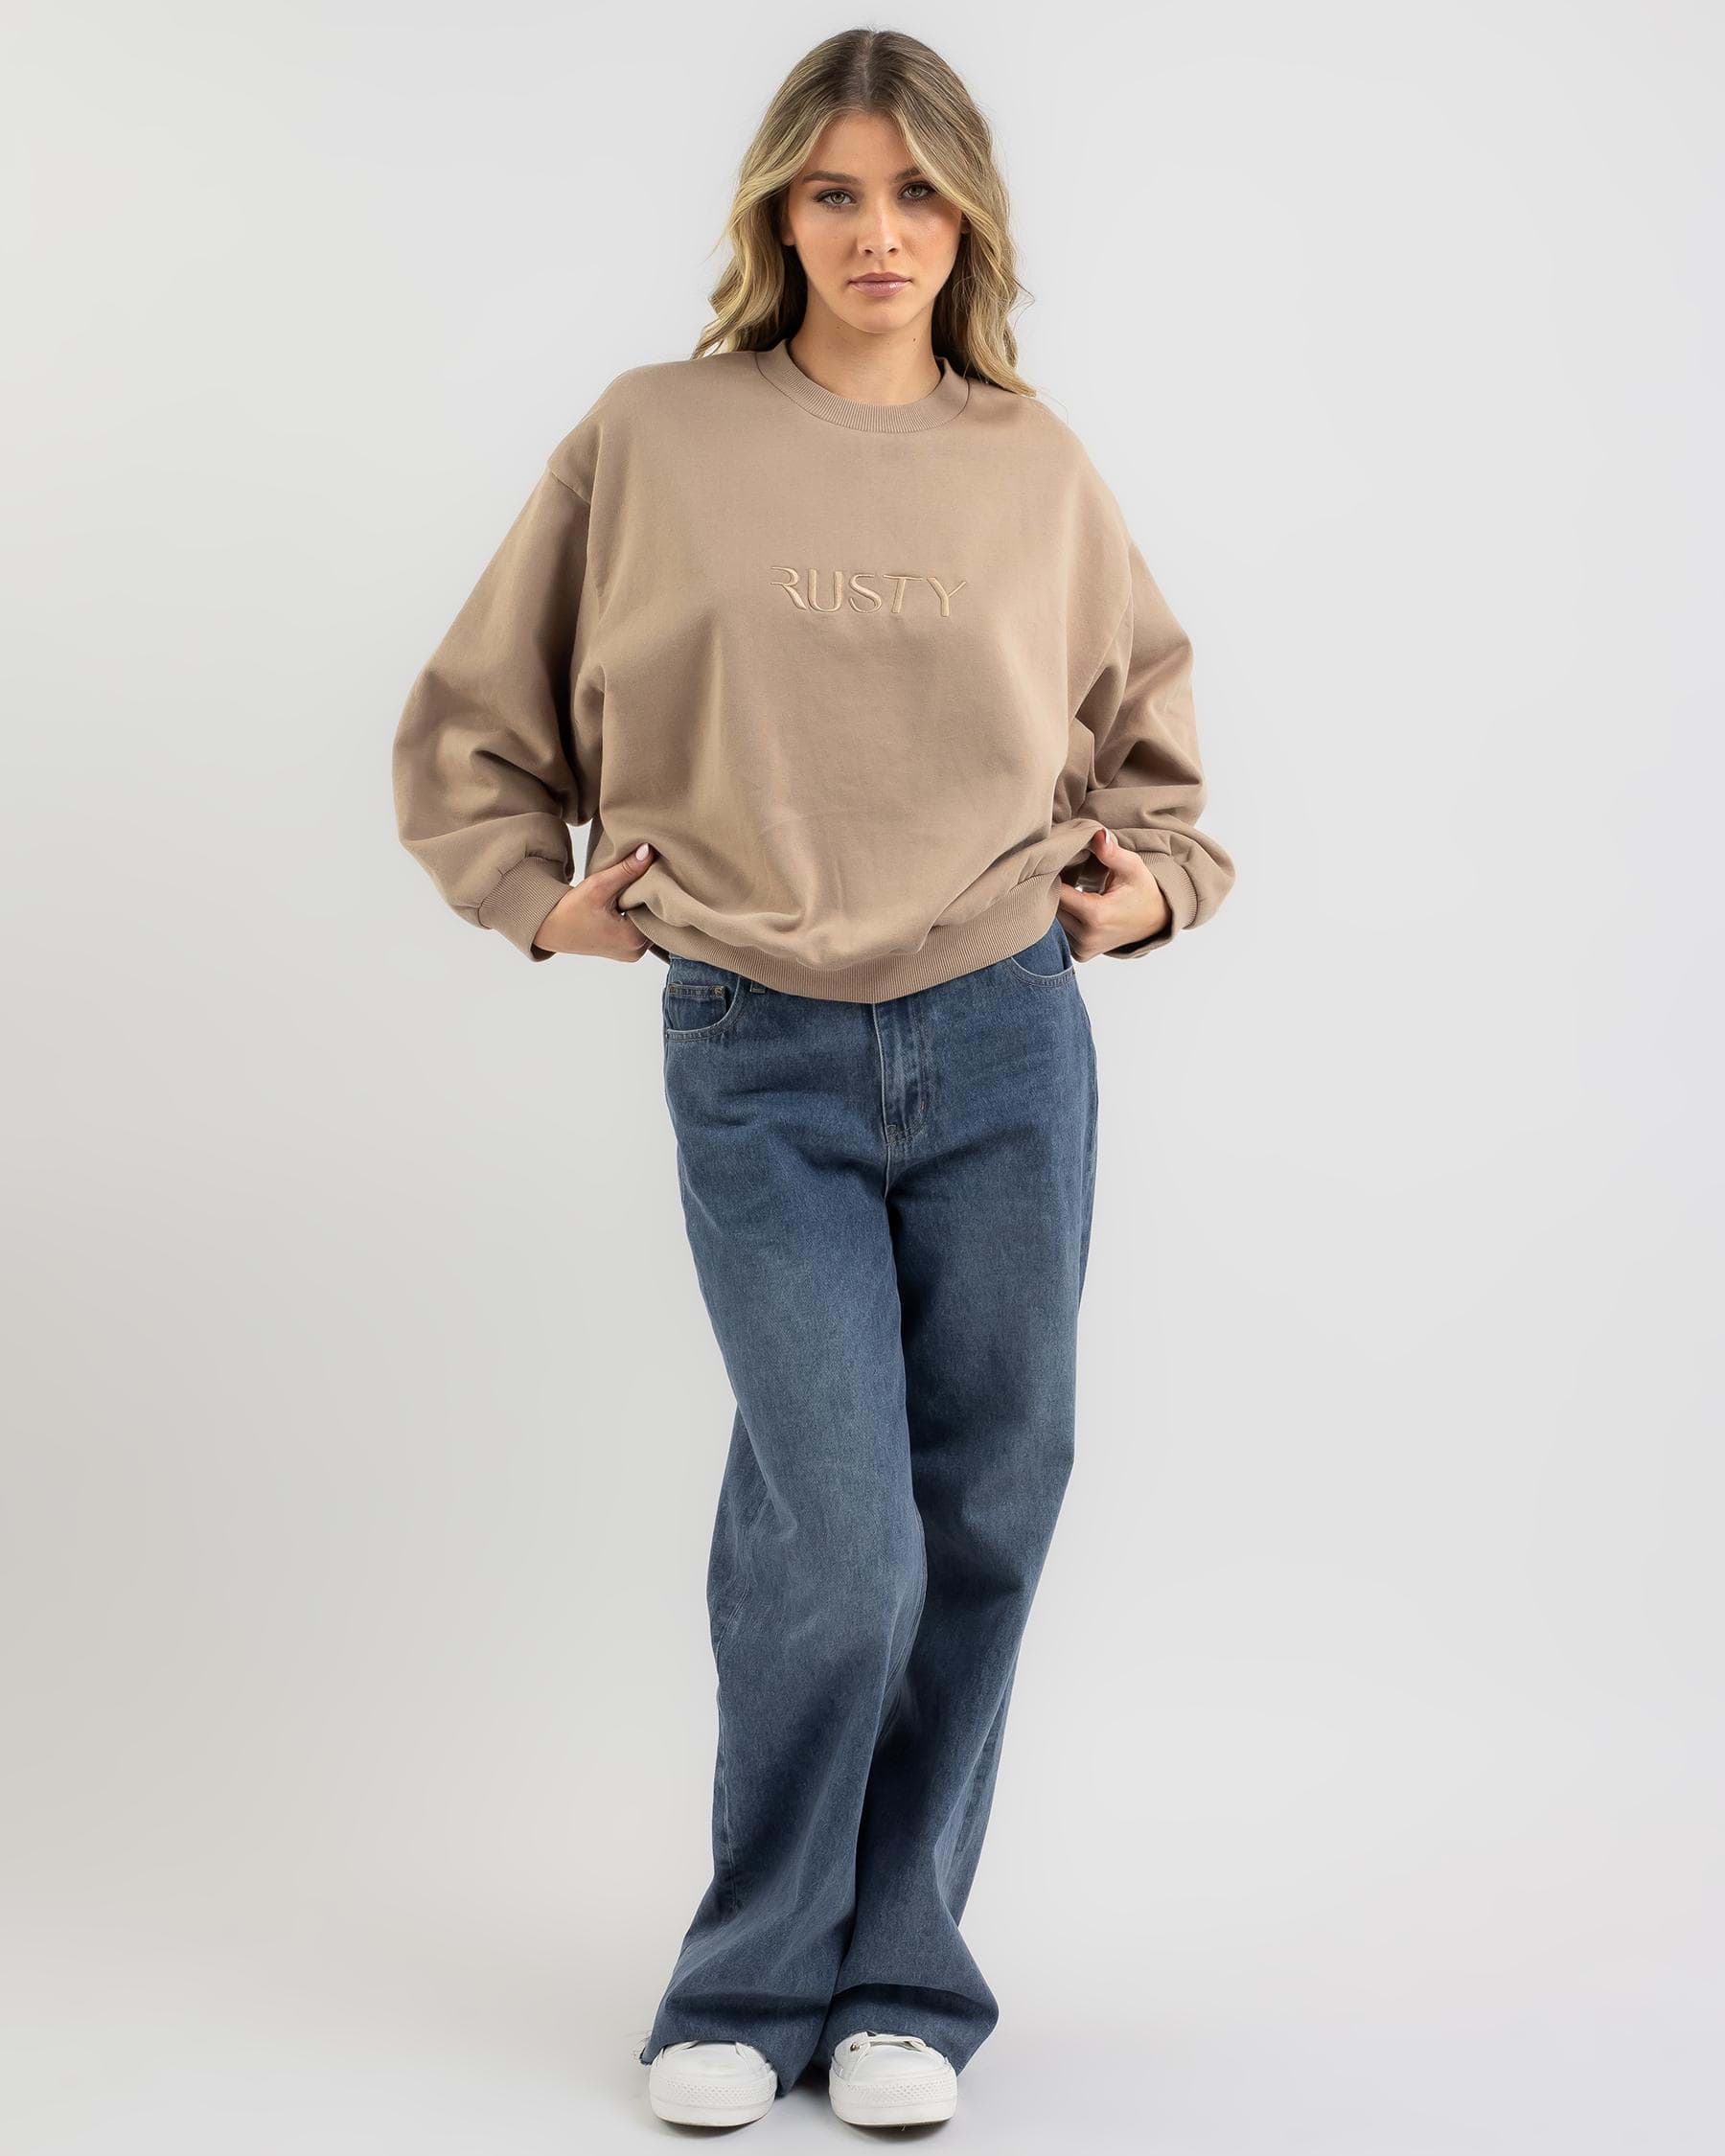 Shop Rusty Signature Sweatshirt In Taupe - Fast Shipping & Easy Returns ...